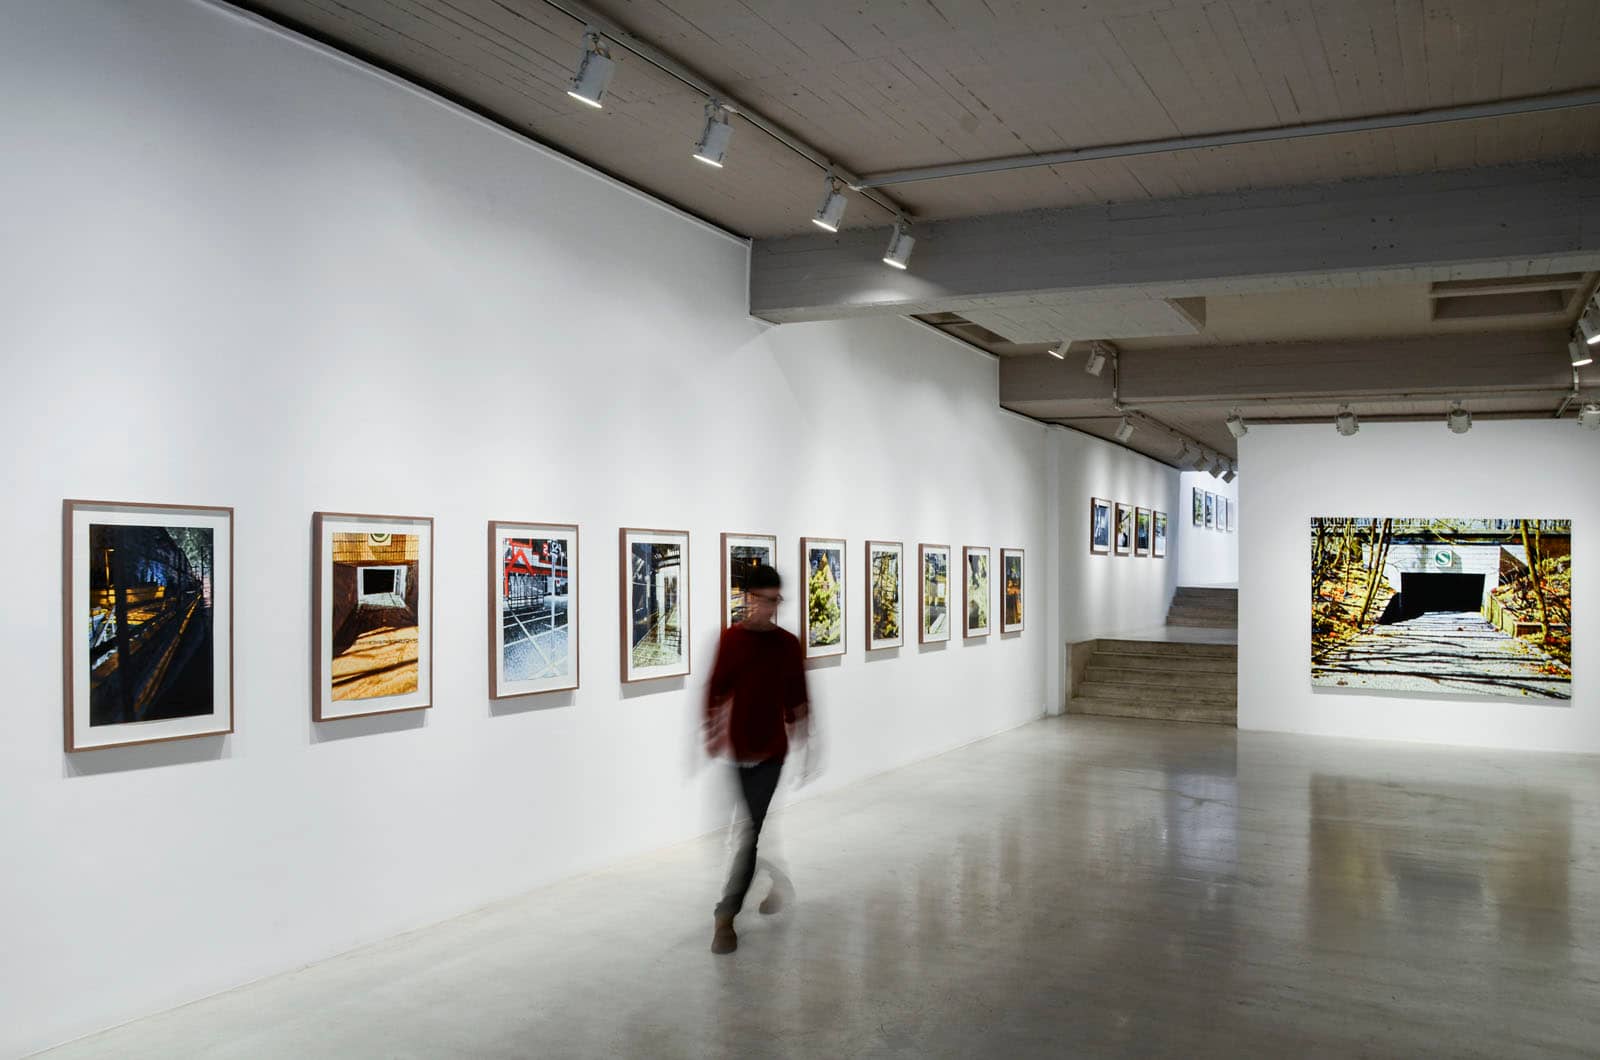 Exhibition view from the solo show "Remote Viewing" by Philipp Fröhlich at Soledad Lorenzo gallery in Madrid, Spain, 2012. The photo shows the main space of the galley with various tempera paintings on canvas and paper.